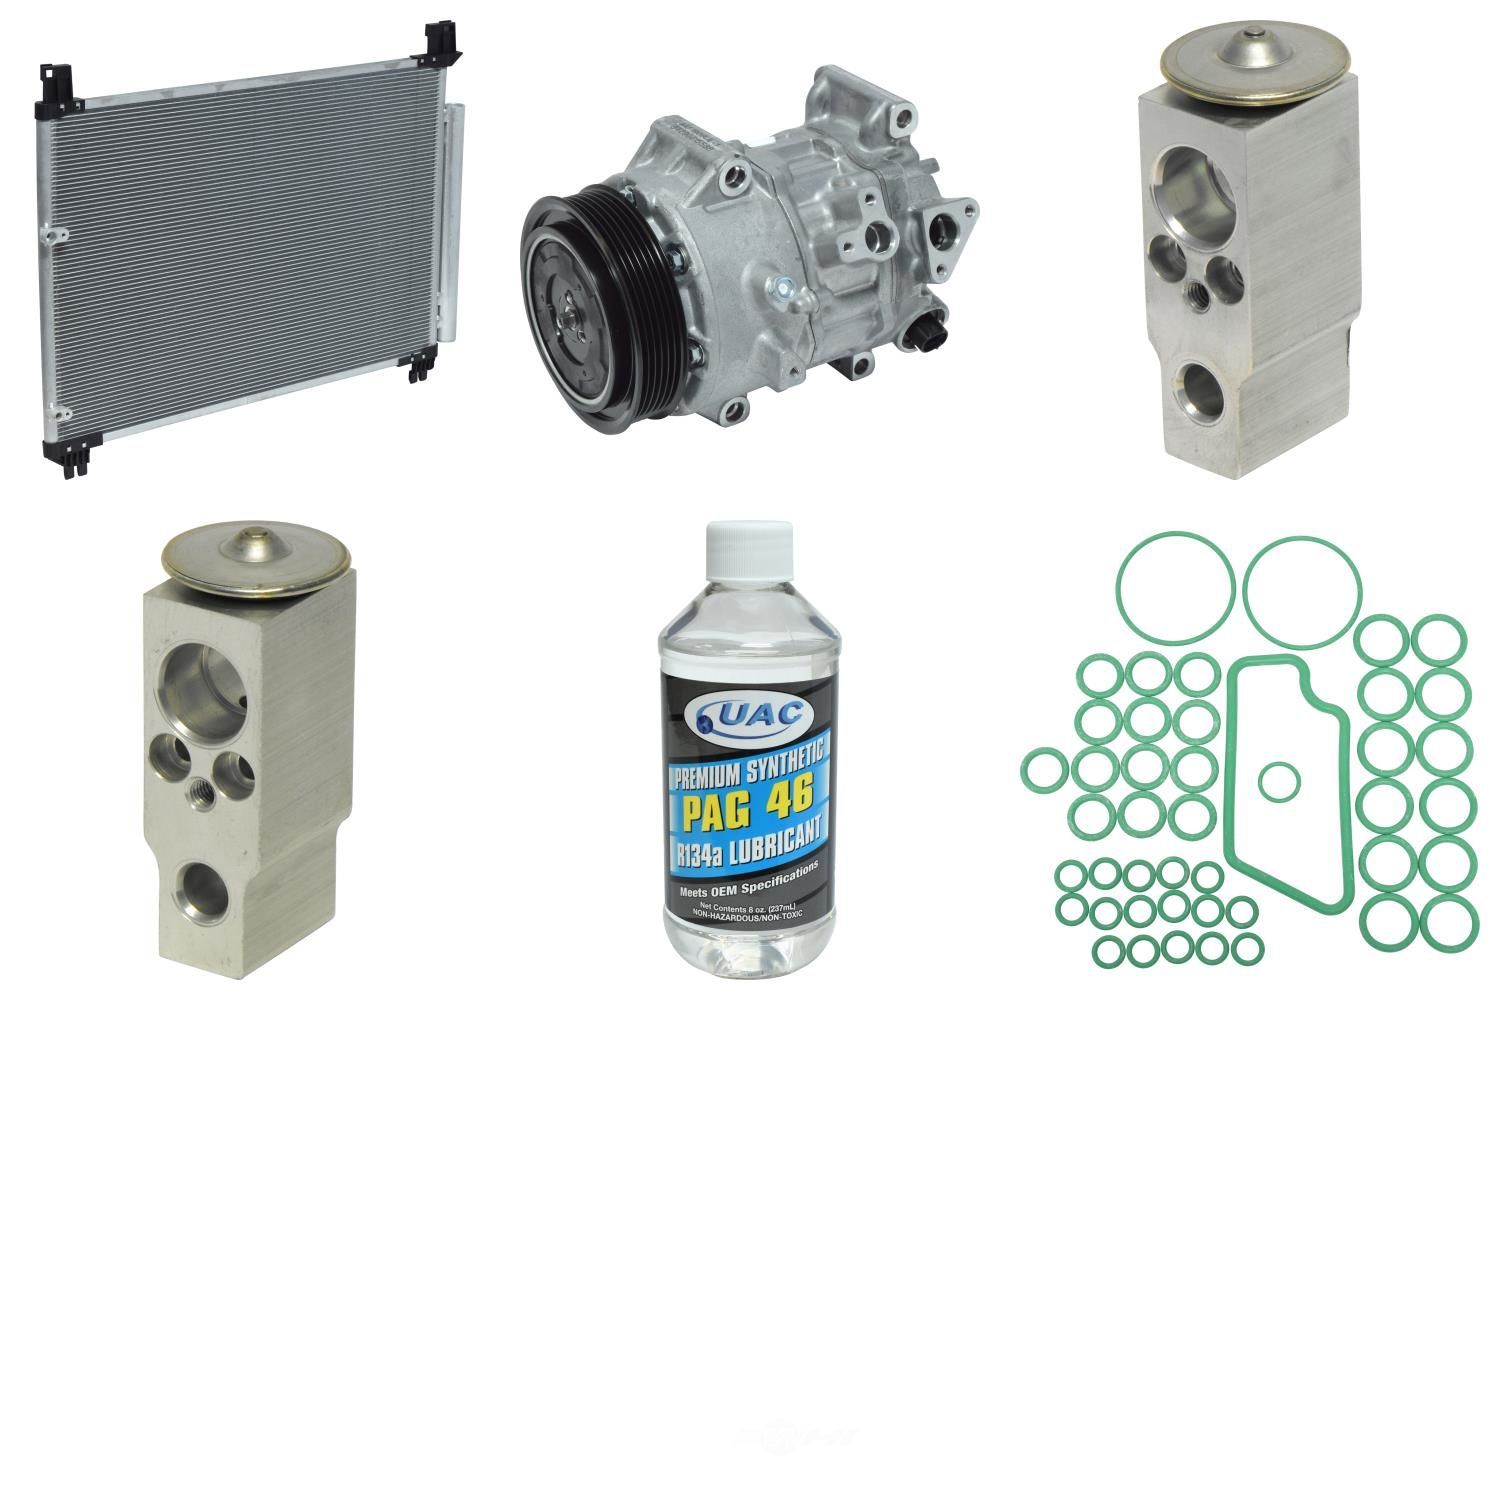 UNIVERSAL AIR CONDITIONER, INC. - Compressor-condenser Replacement Kit - UAC KT 5558A